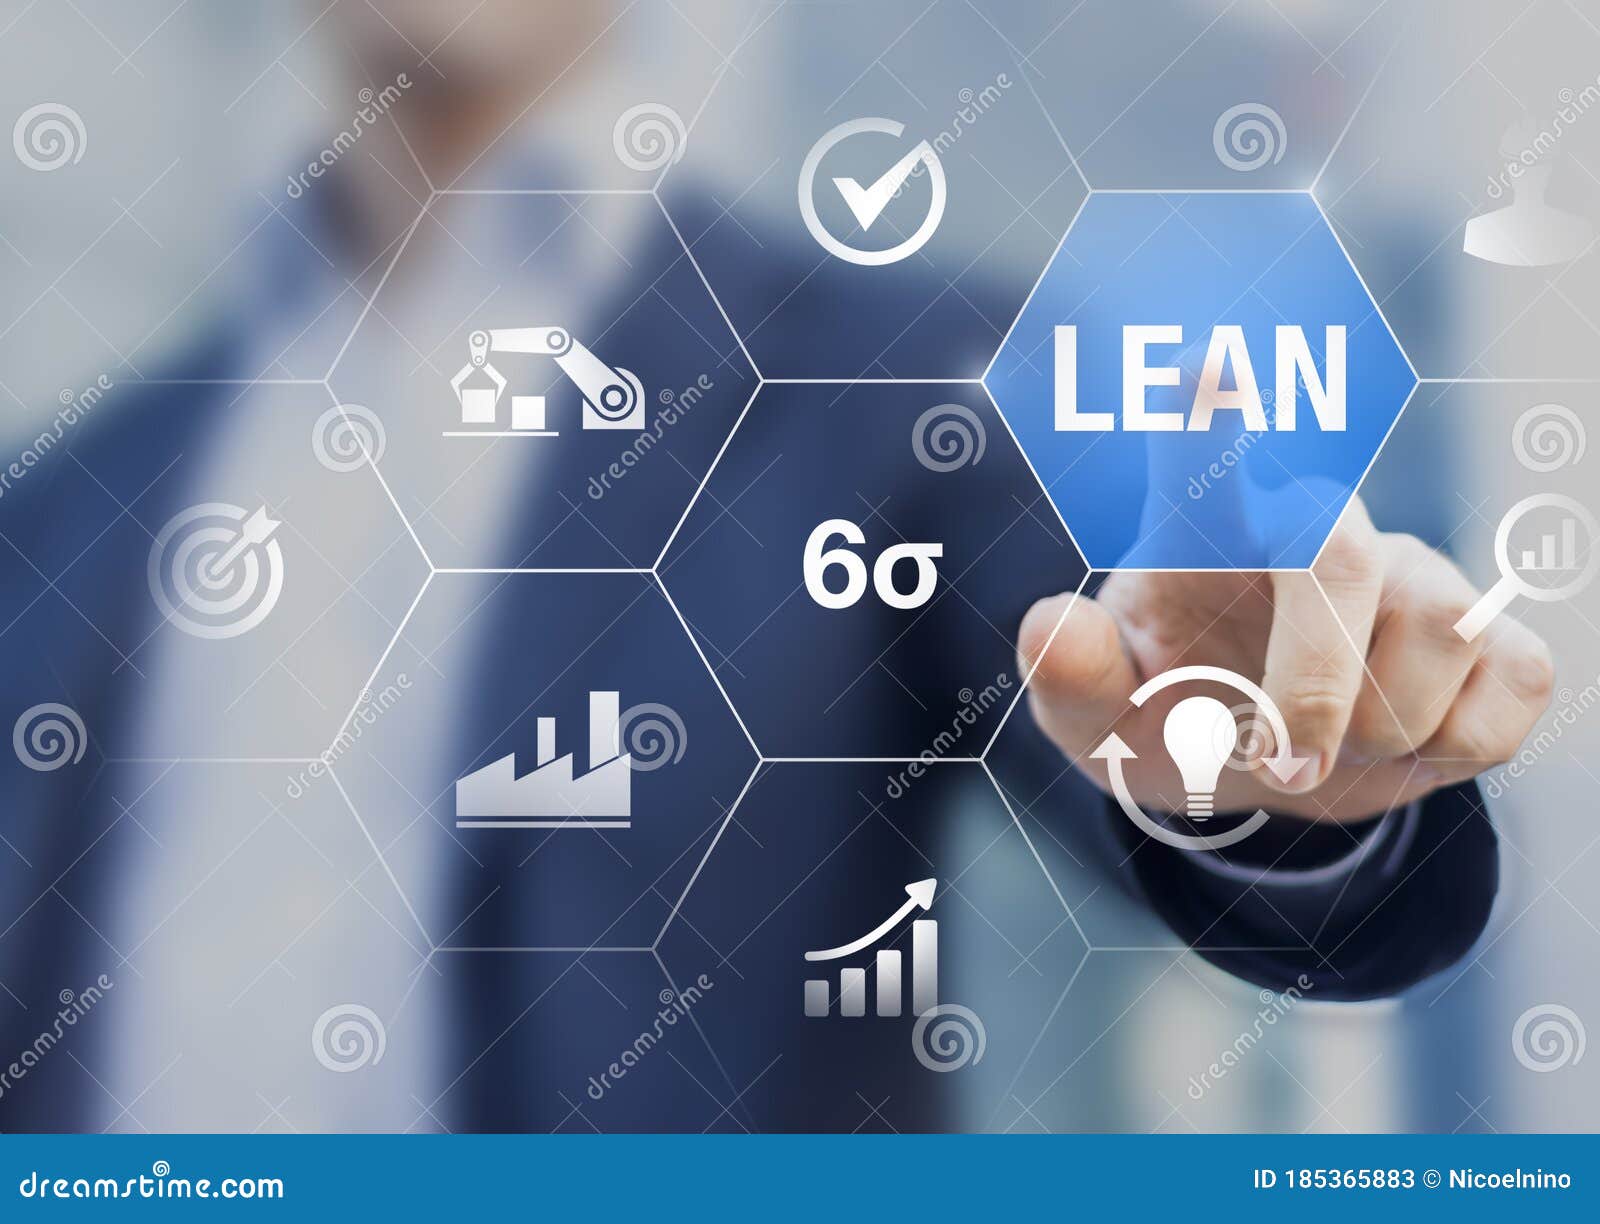 lean manufacturing and six sigma management and quality standard in industry, continuous improvement, reduce waste, improve